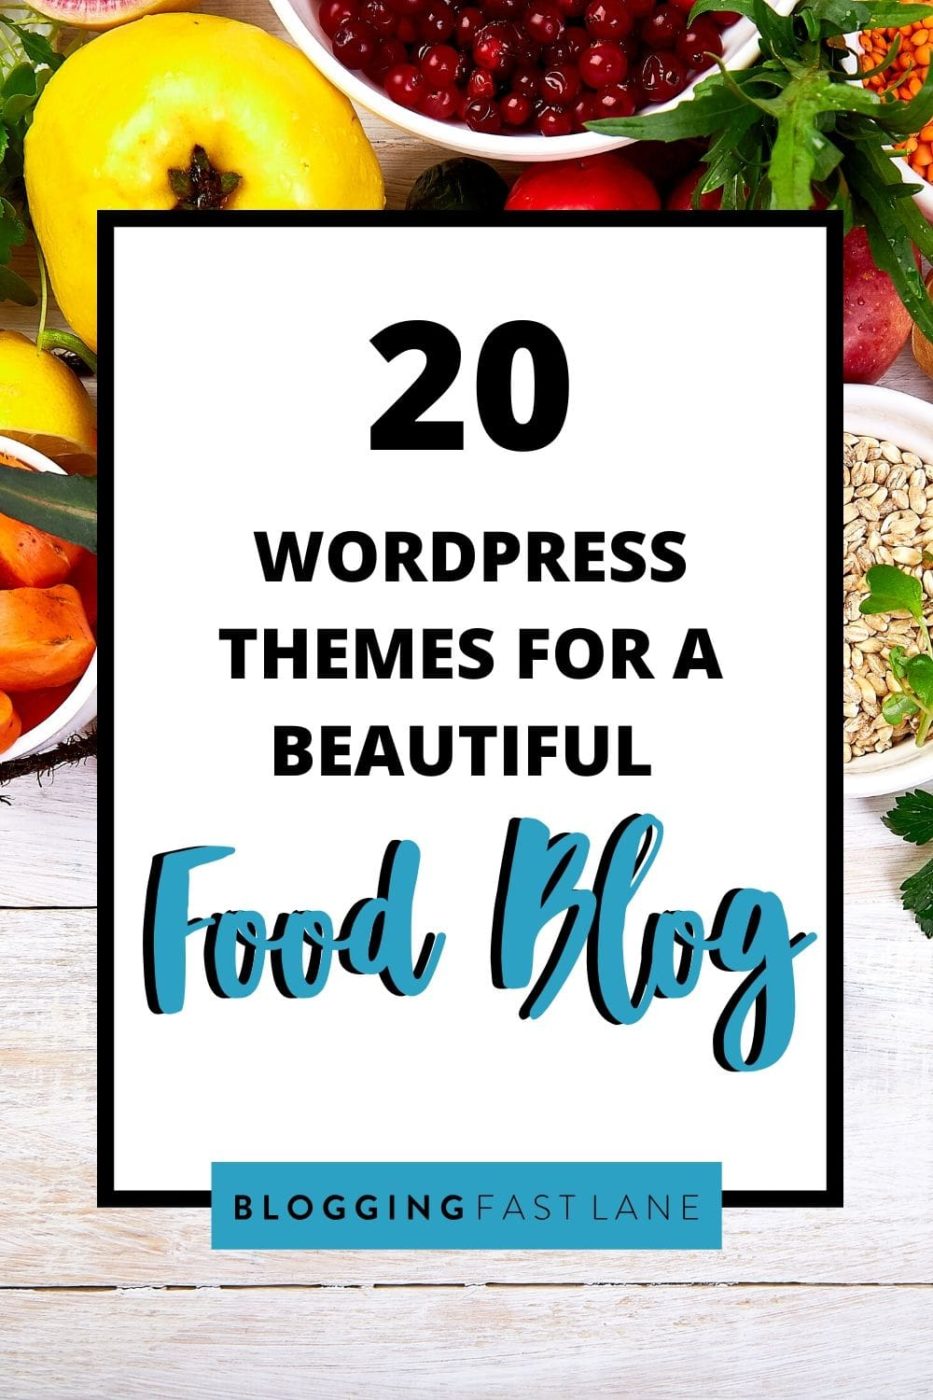 Best WordPress Themes for Food Blogs | Searching for the best WordPress theme for food blogs? Look no further! Here are 20 of the best themes for food content, recipes, and beyond.